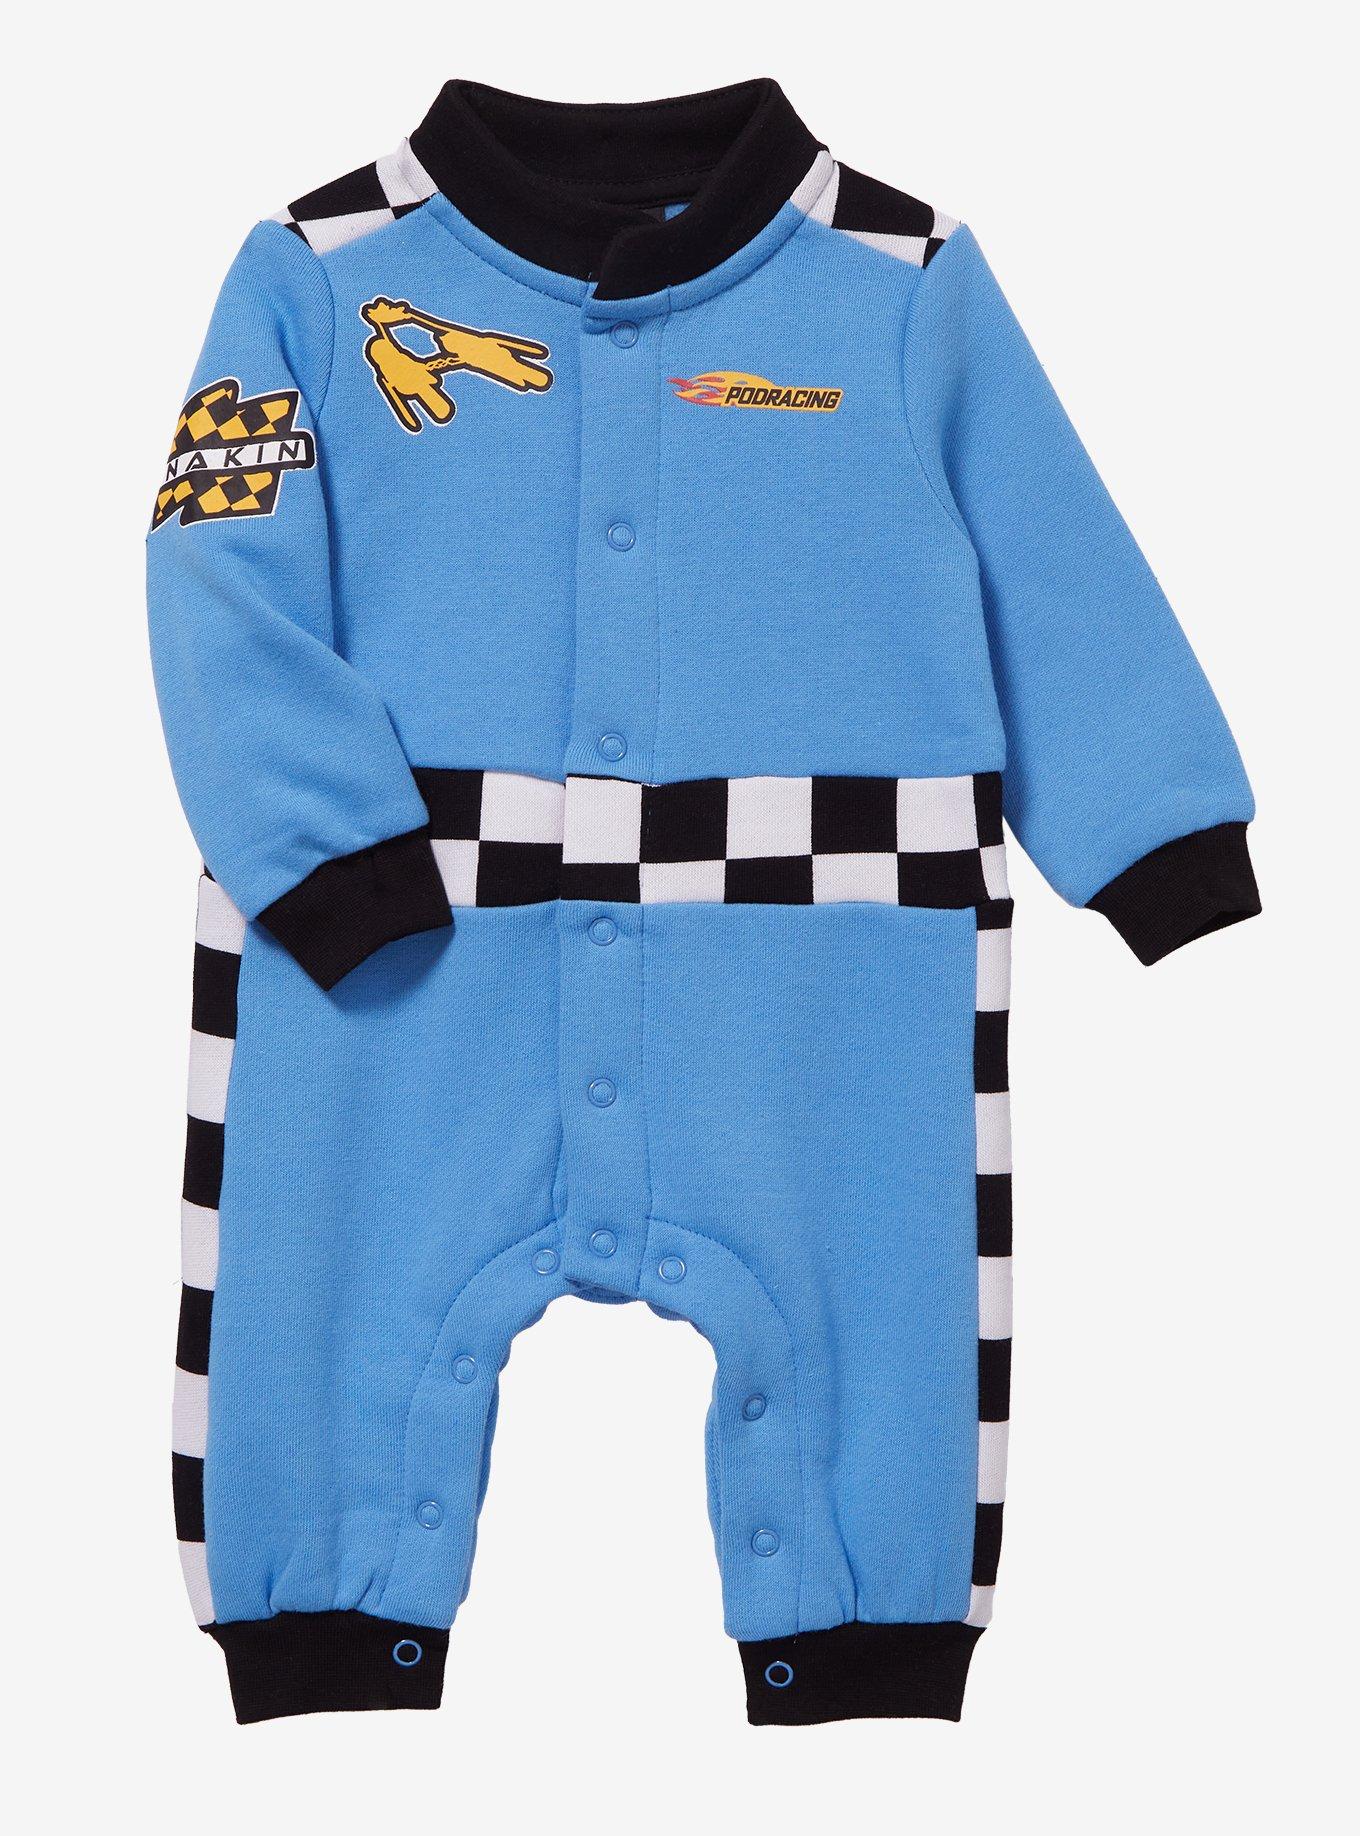 Star Wars Podracing Racing Suit Infant One-Piece - BoxLunch Exclusive, BLUE, hi-res